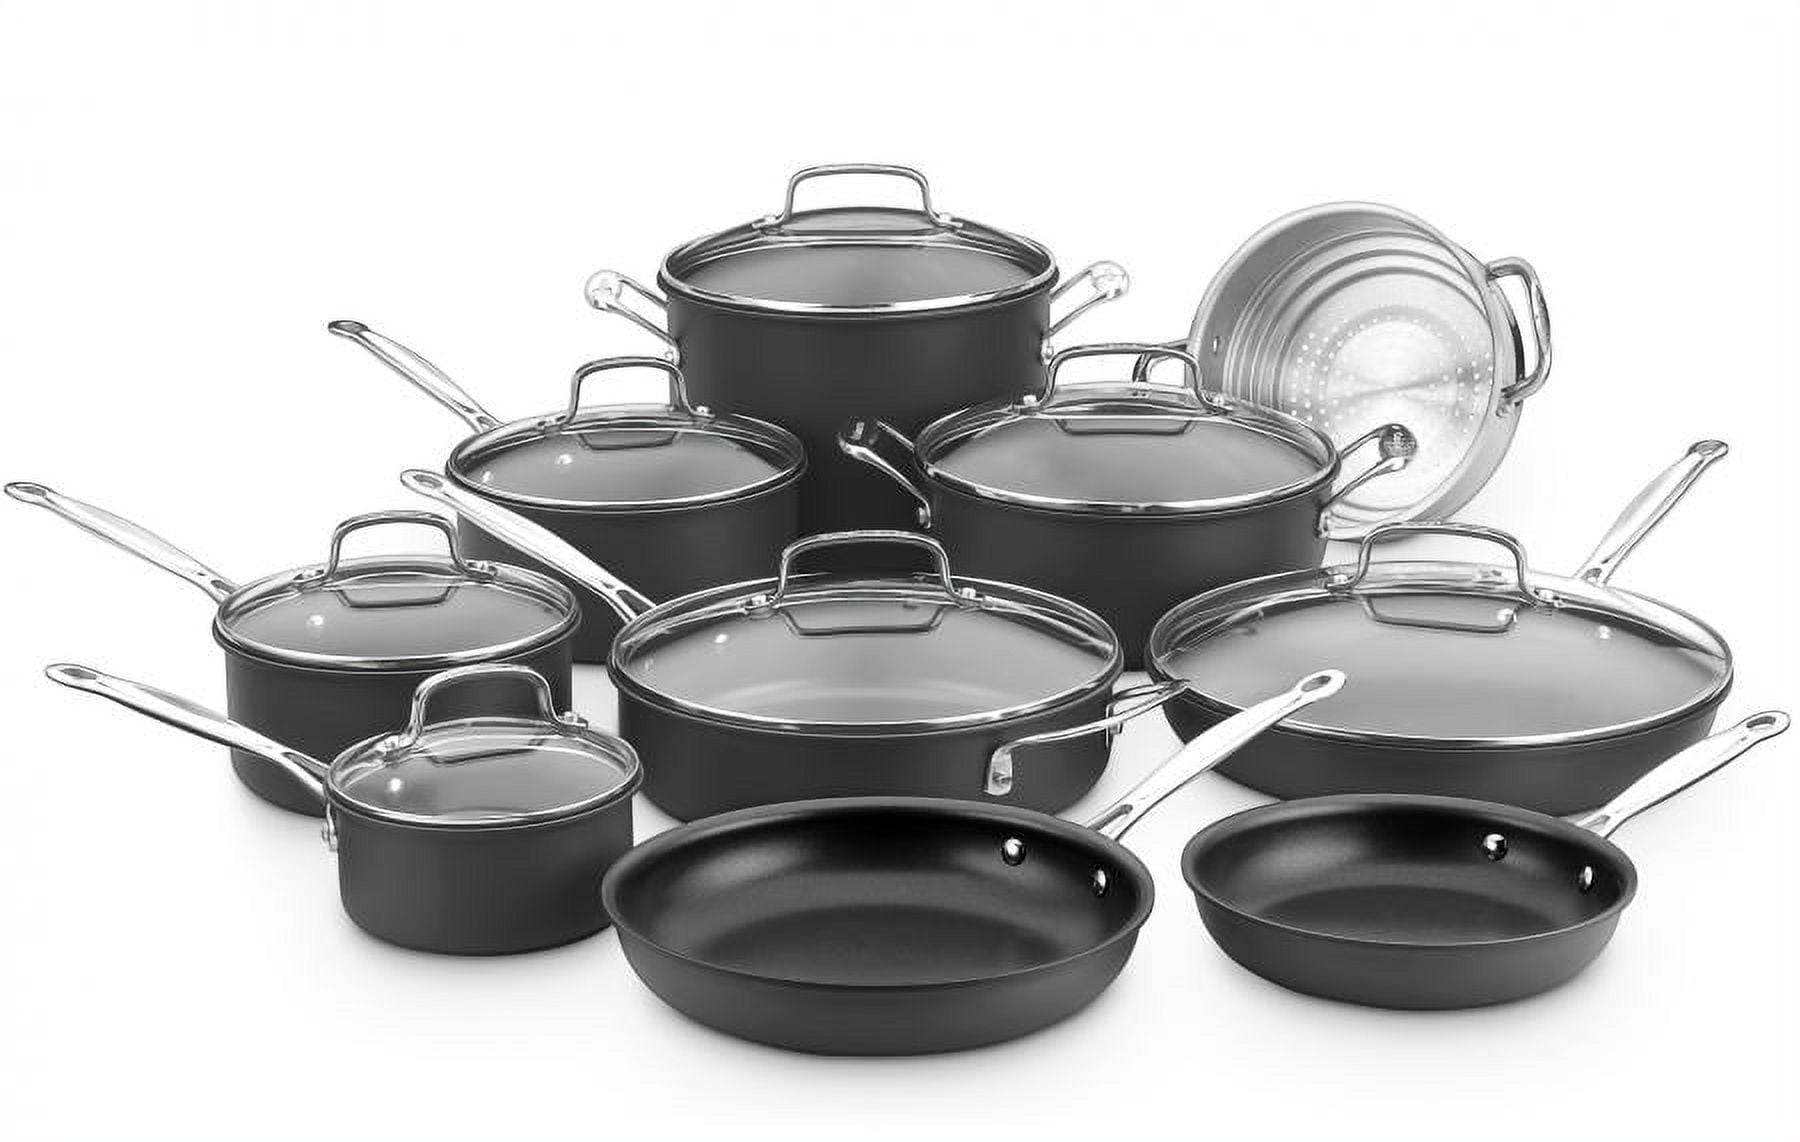 Cuisinart Chef's Classic Nonstick Hard-Anodized 17-Piece Cookware Set, with  Hard-Anodized Aluminum Exterior, includes 7-3/4-Inch Lidded Steamer and  9-1/2-Inch Pasta Insert 